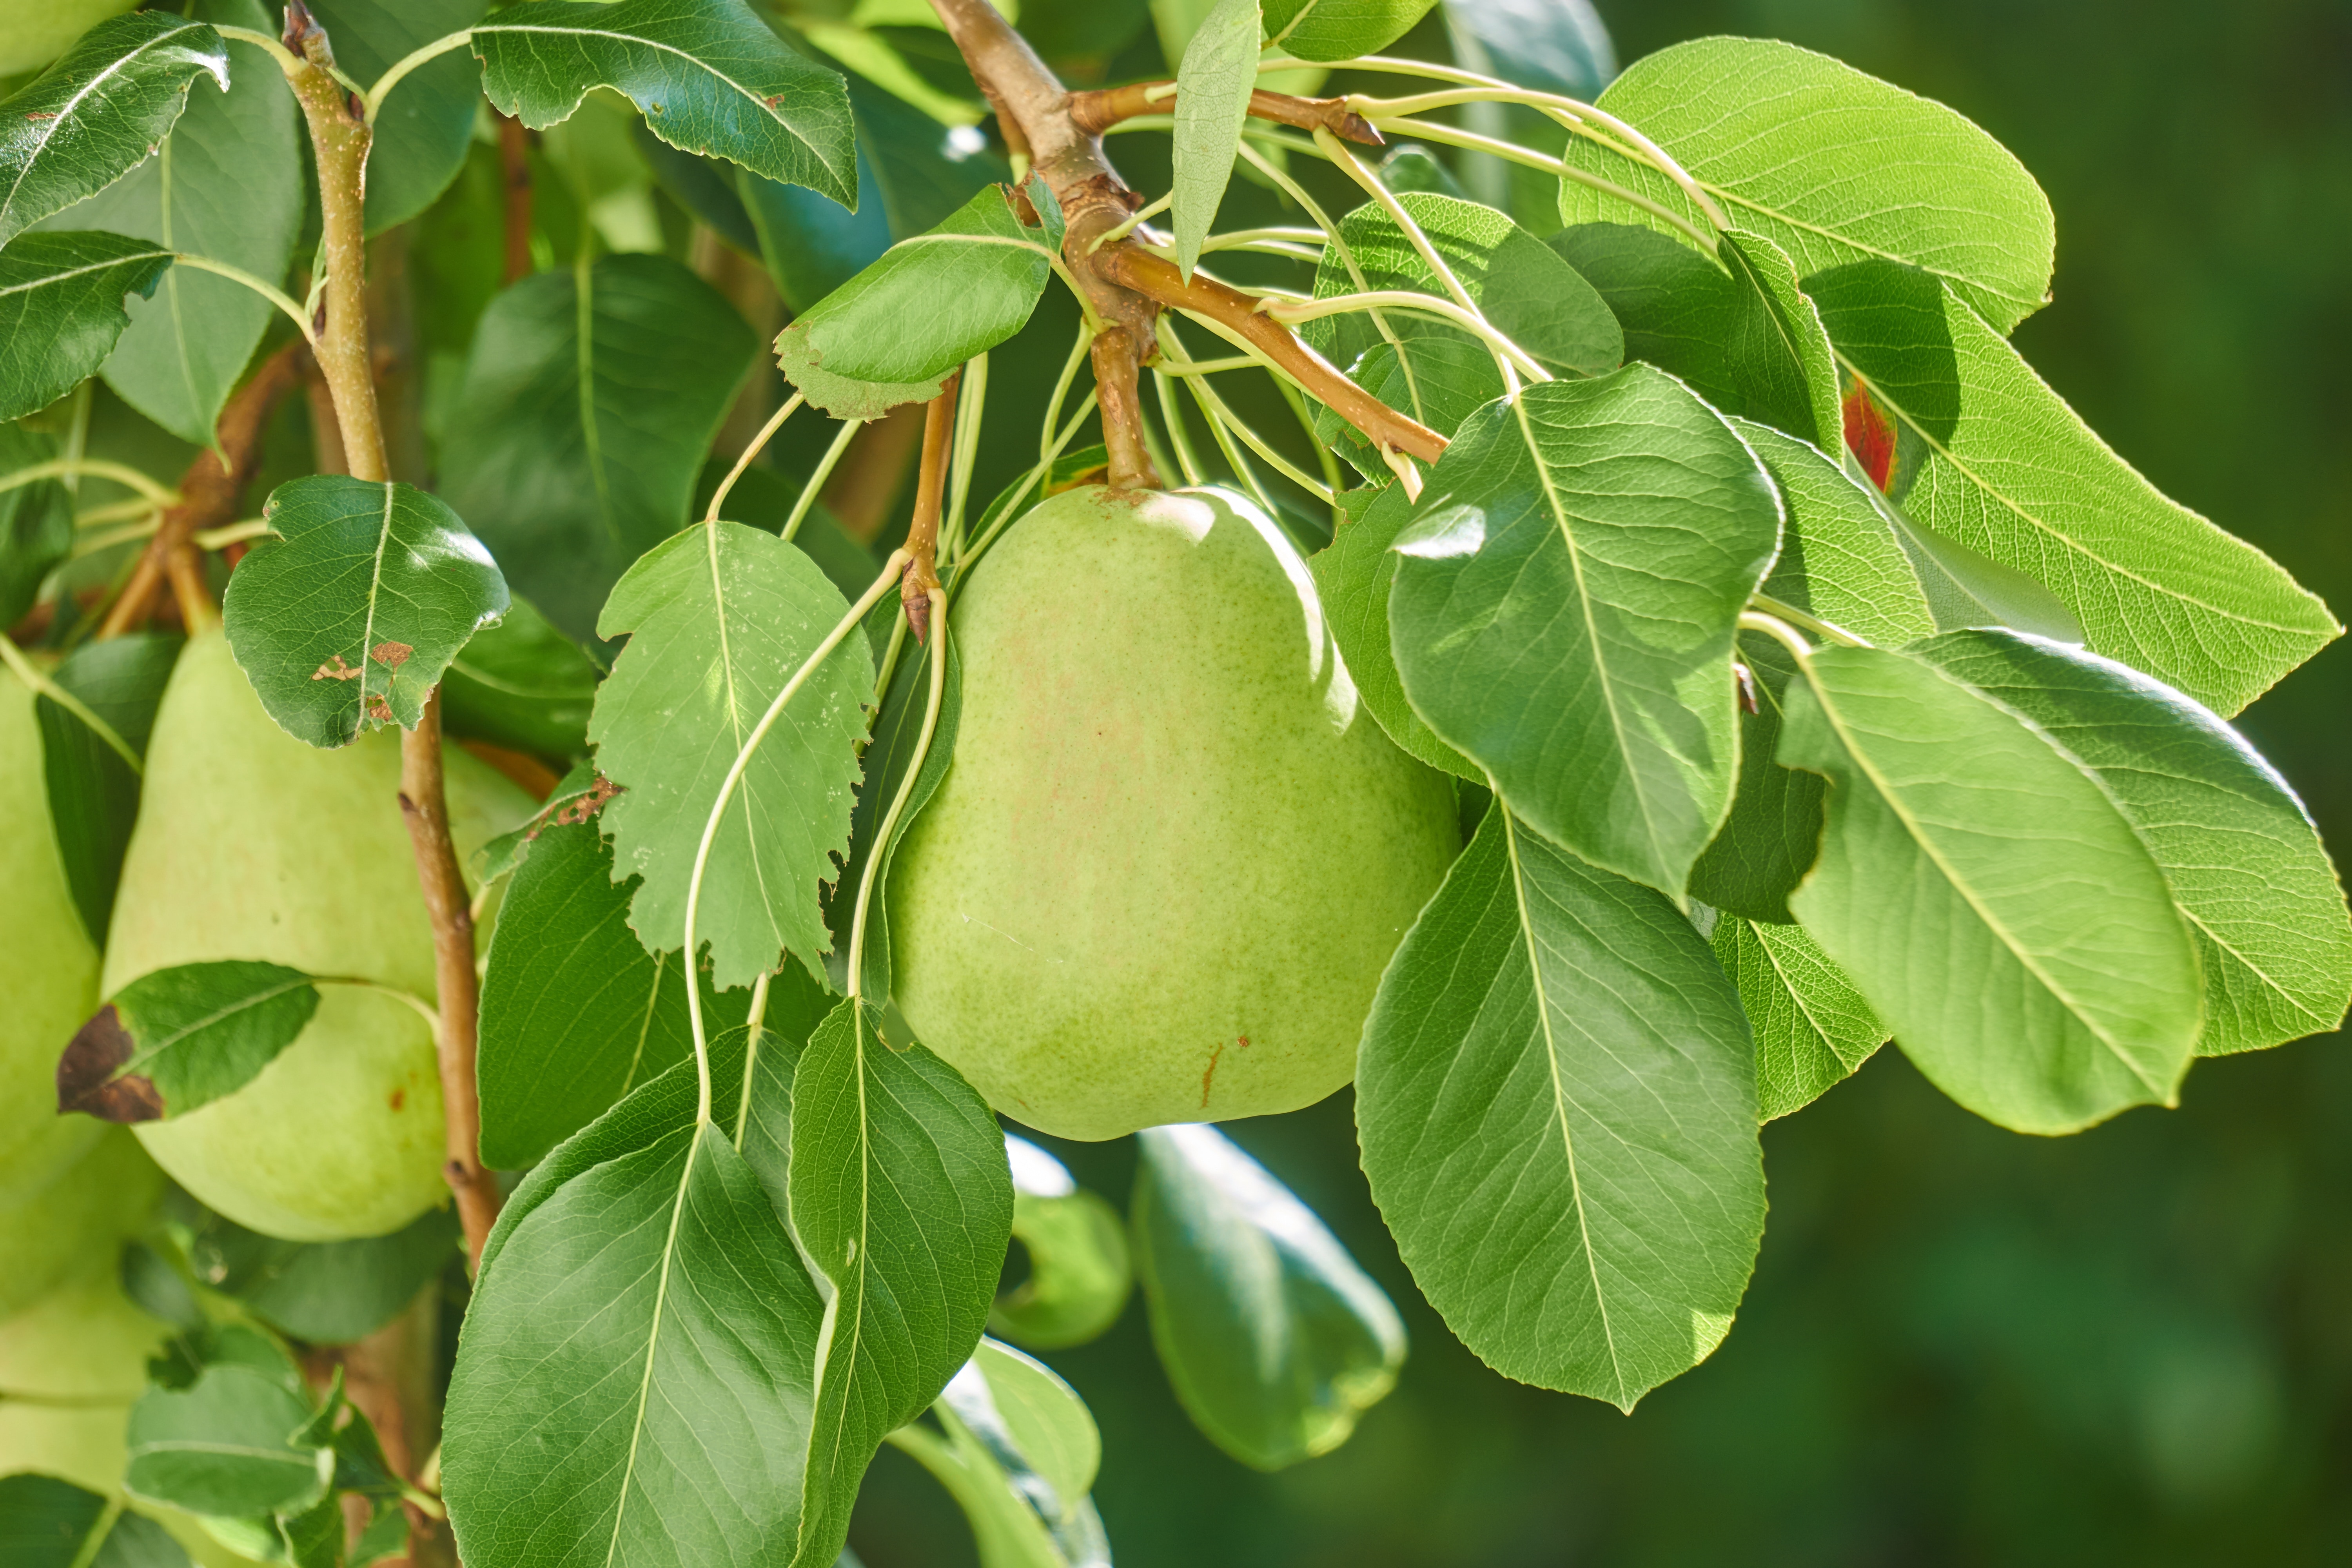 Pear, Food, Green, Fruits, Nature, Fruit, leaf, food and drink